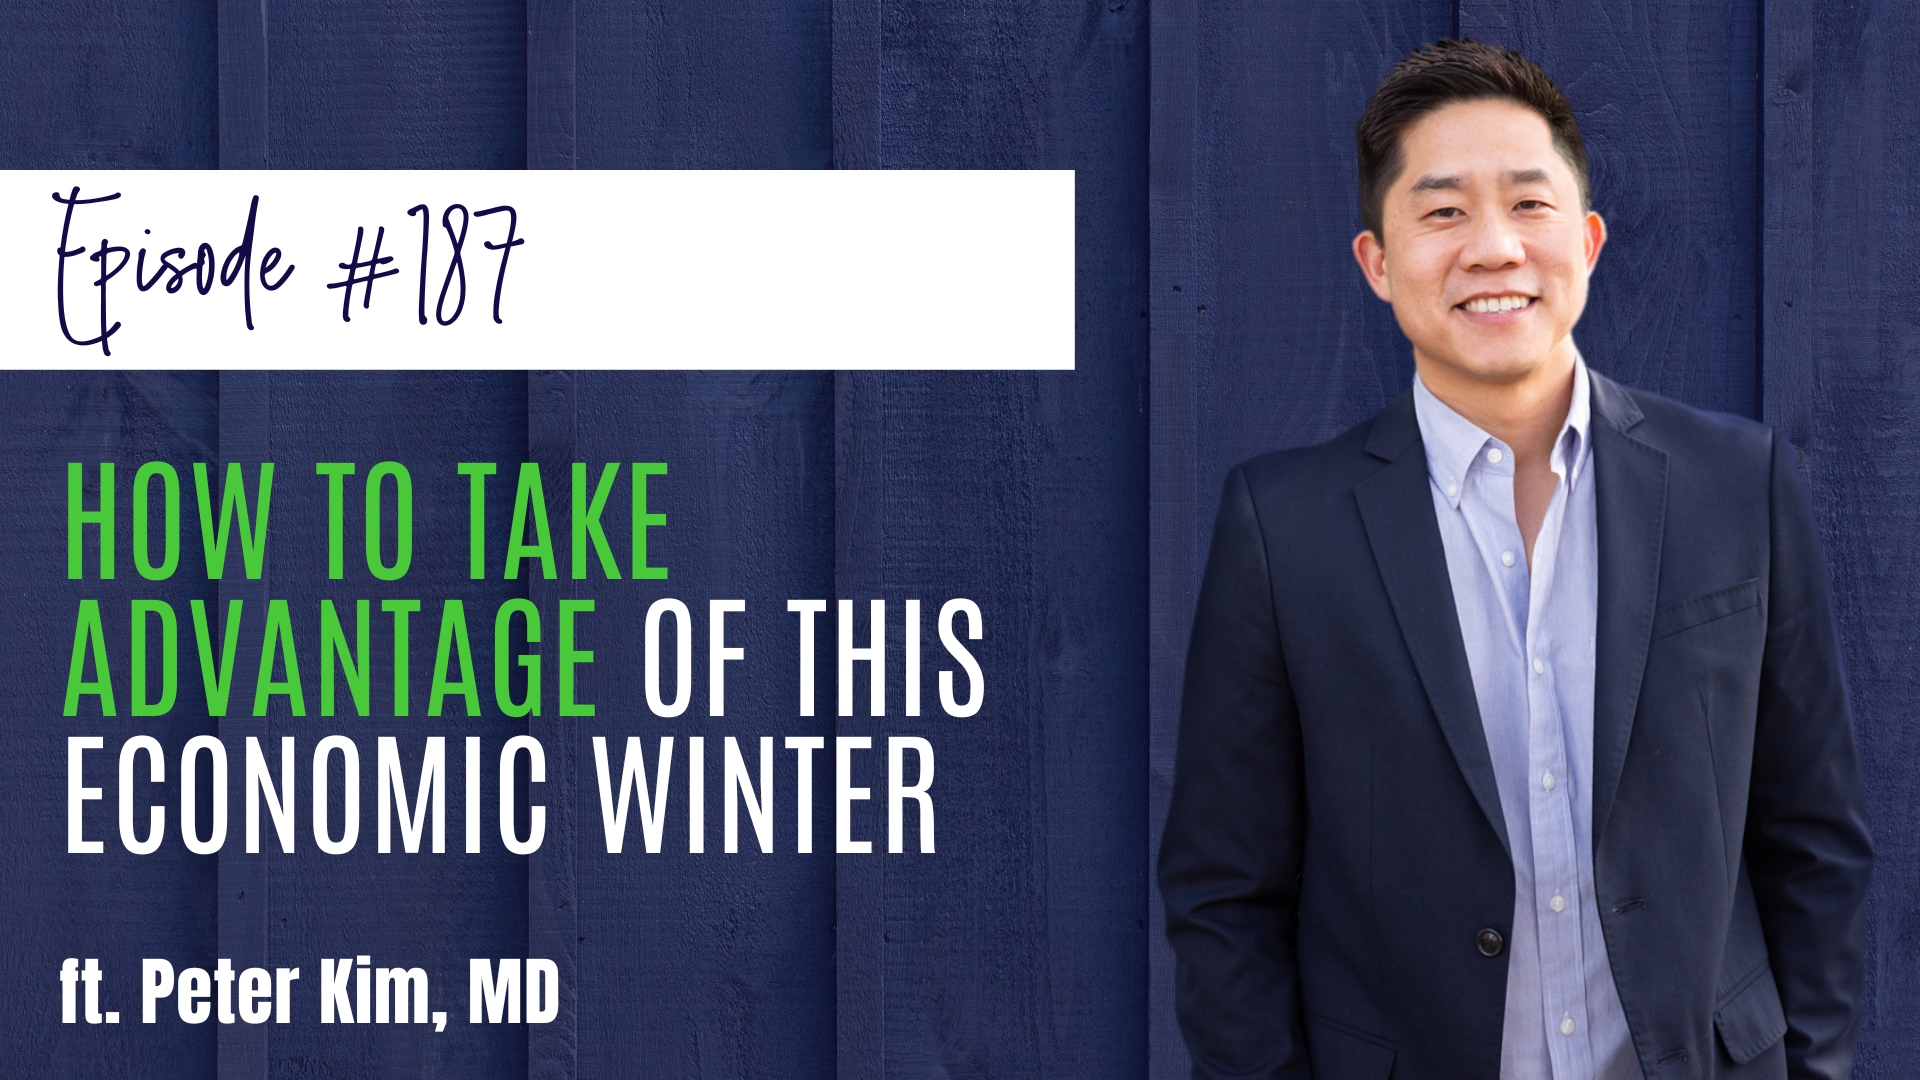 #187 How to Take Advantage of this Economic Winter ft. Peter Kim, MD